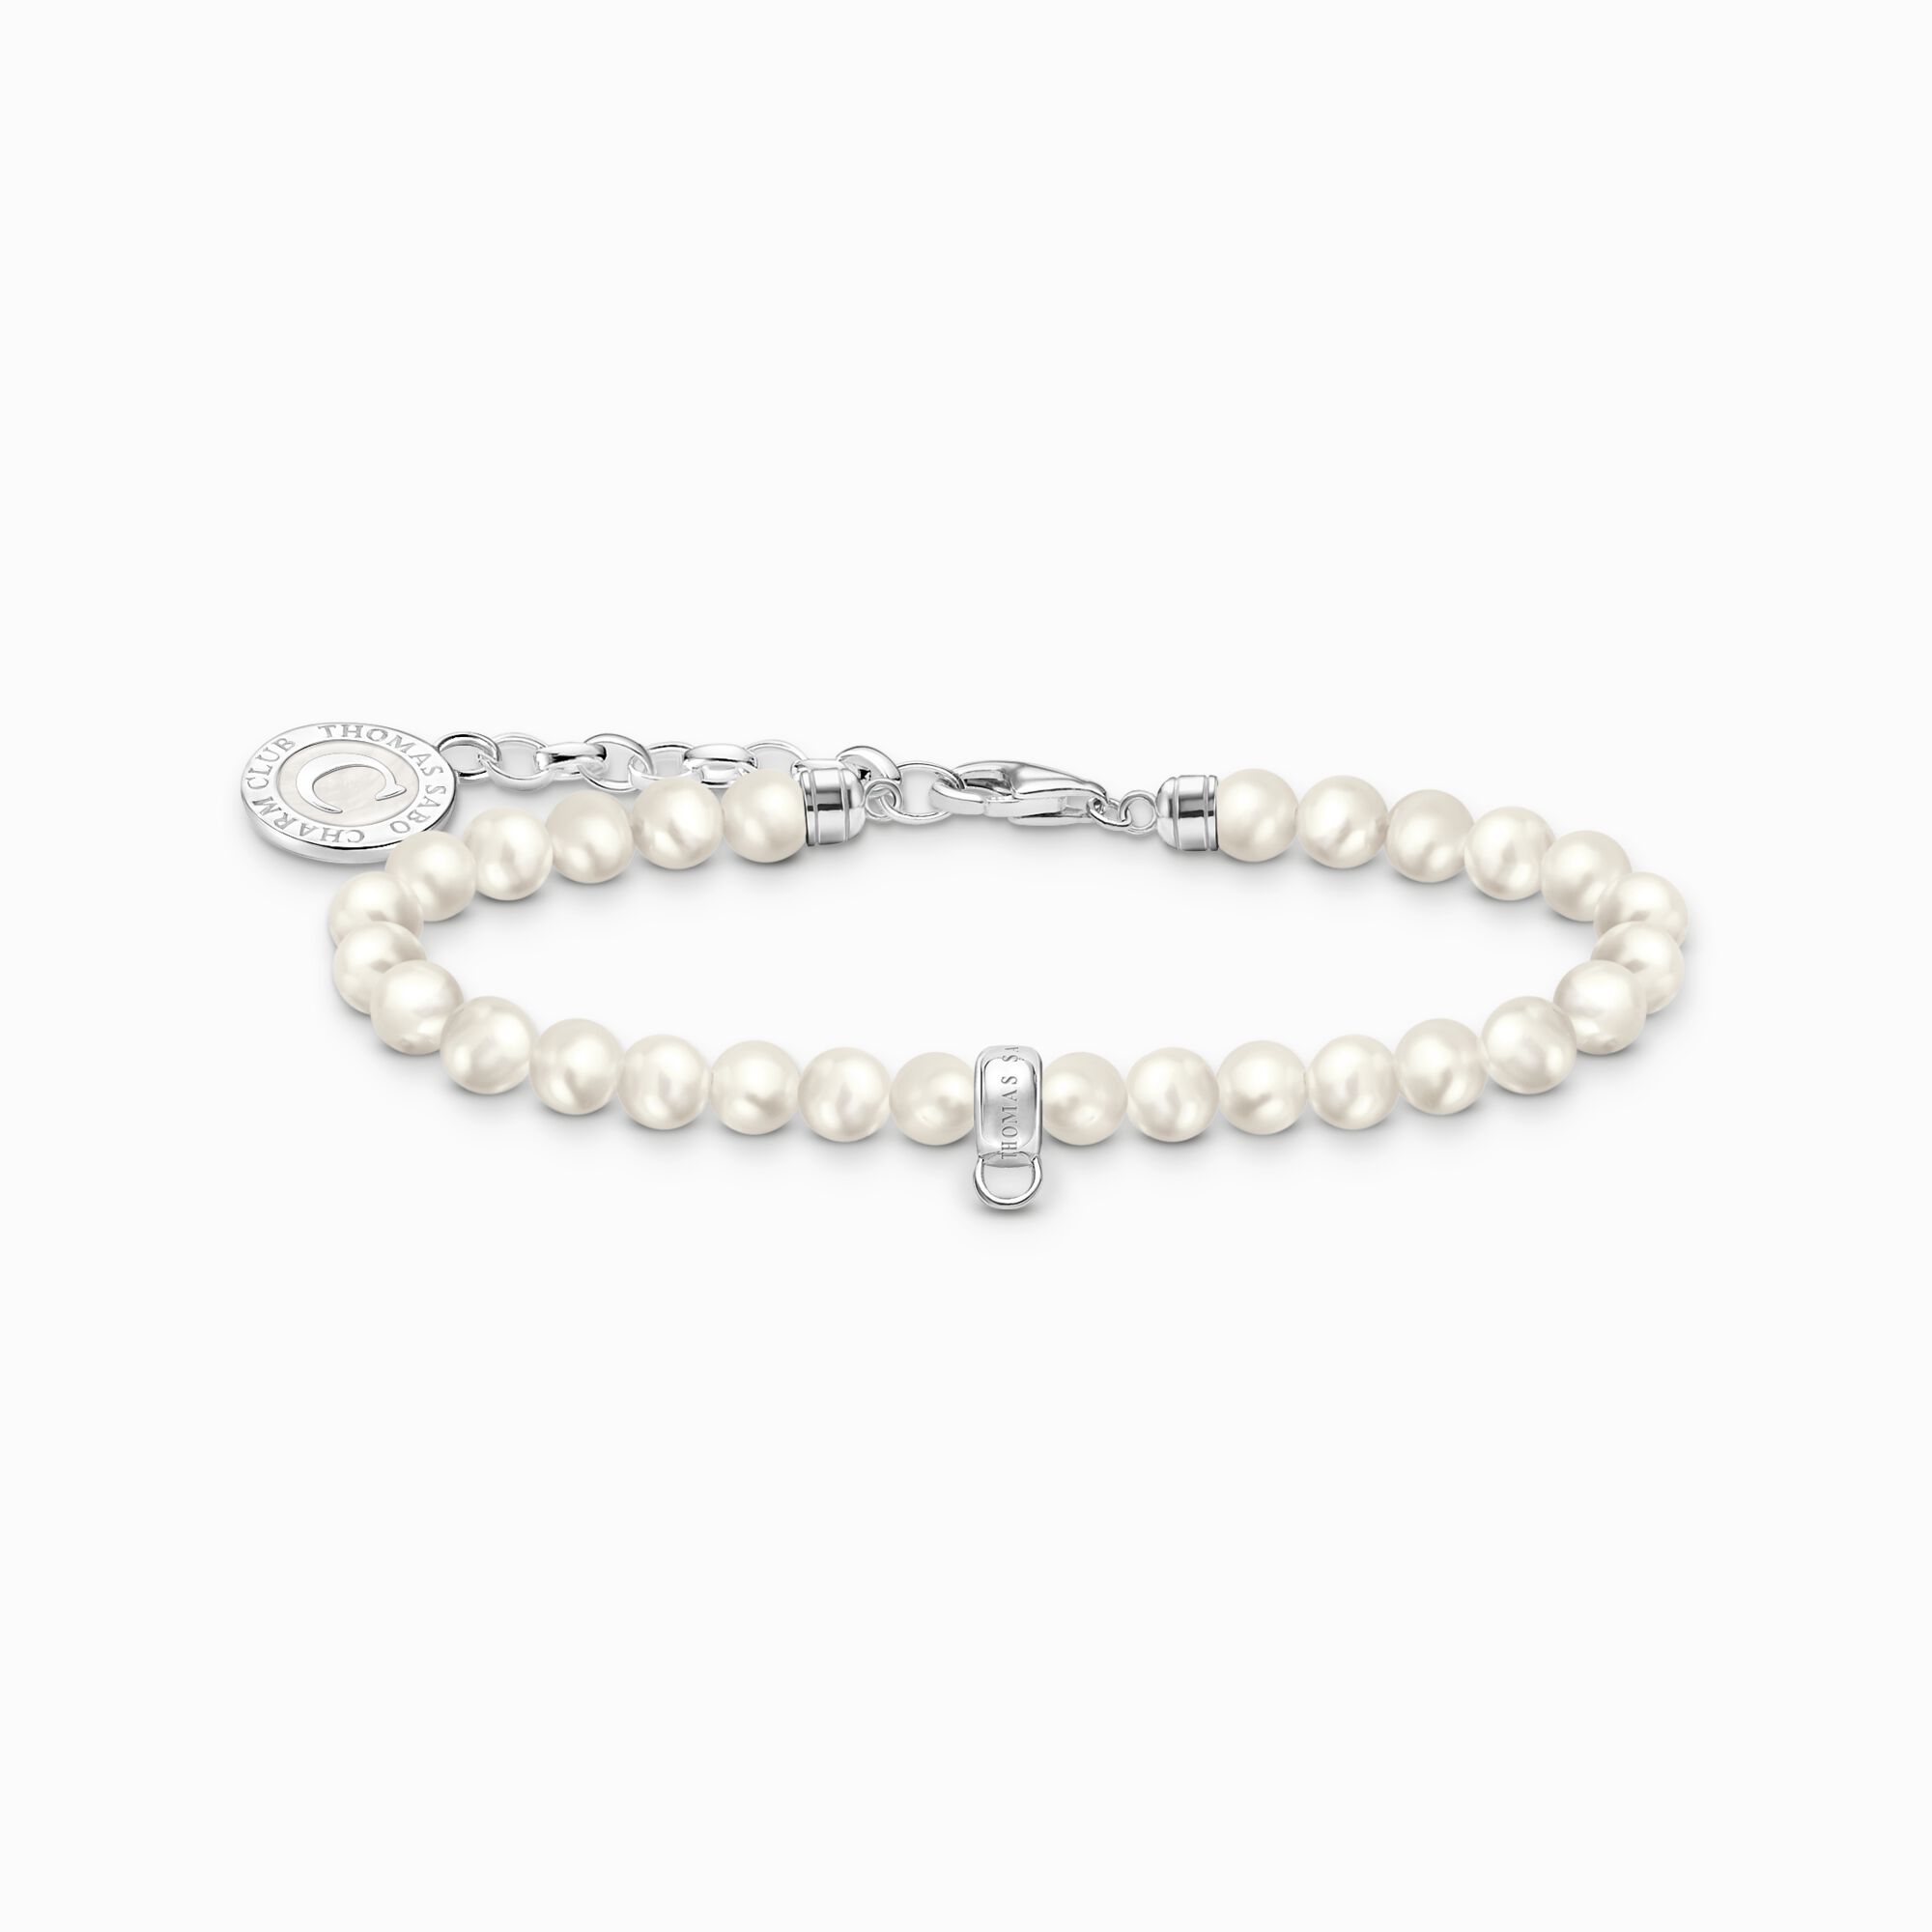 Silver member charm bracelet with white freshwater pearls from the Charm Club collection in the THOMAS SABO online store